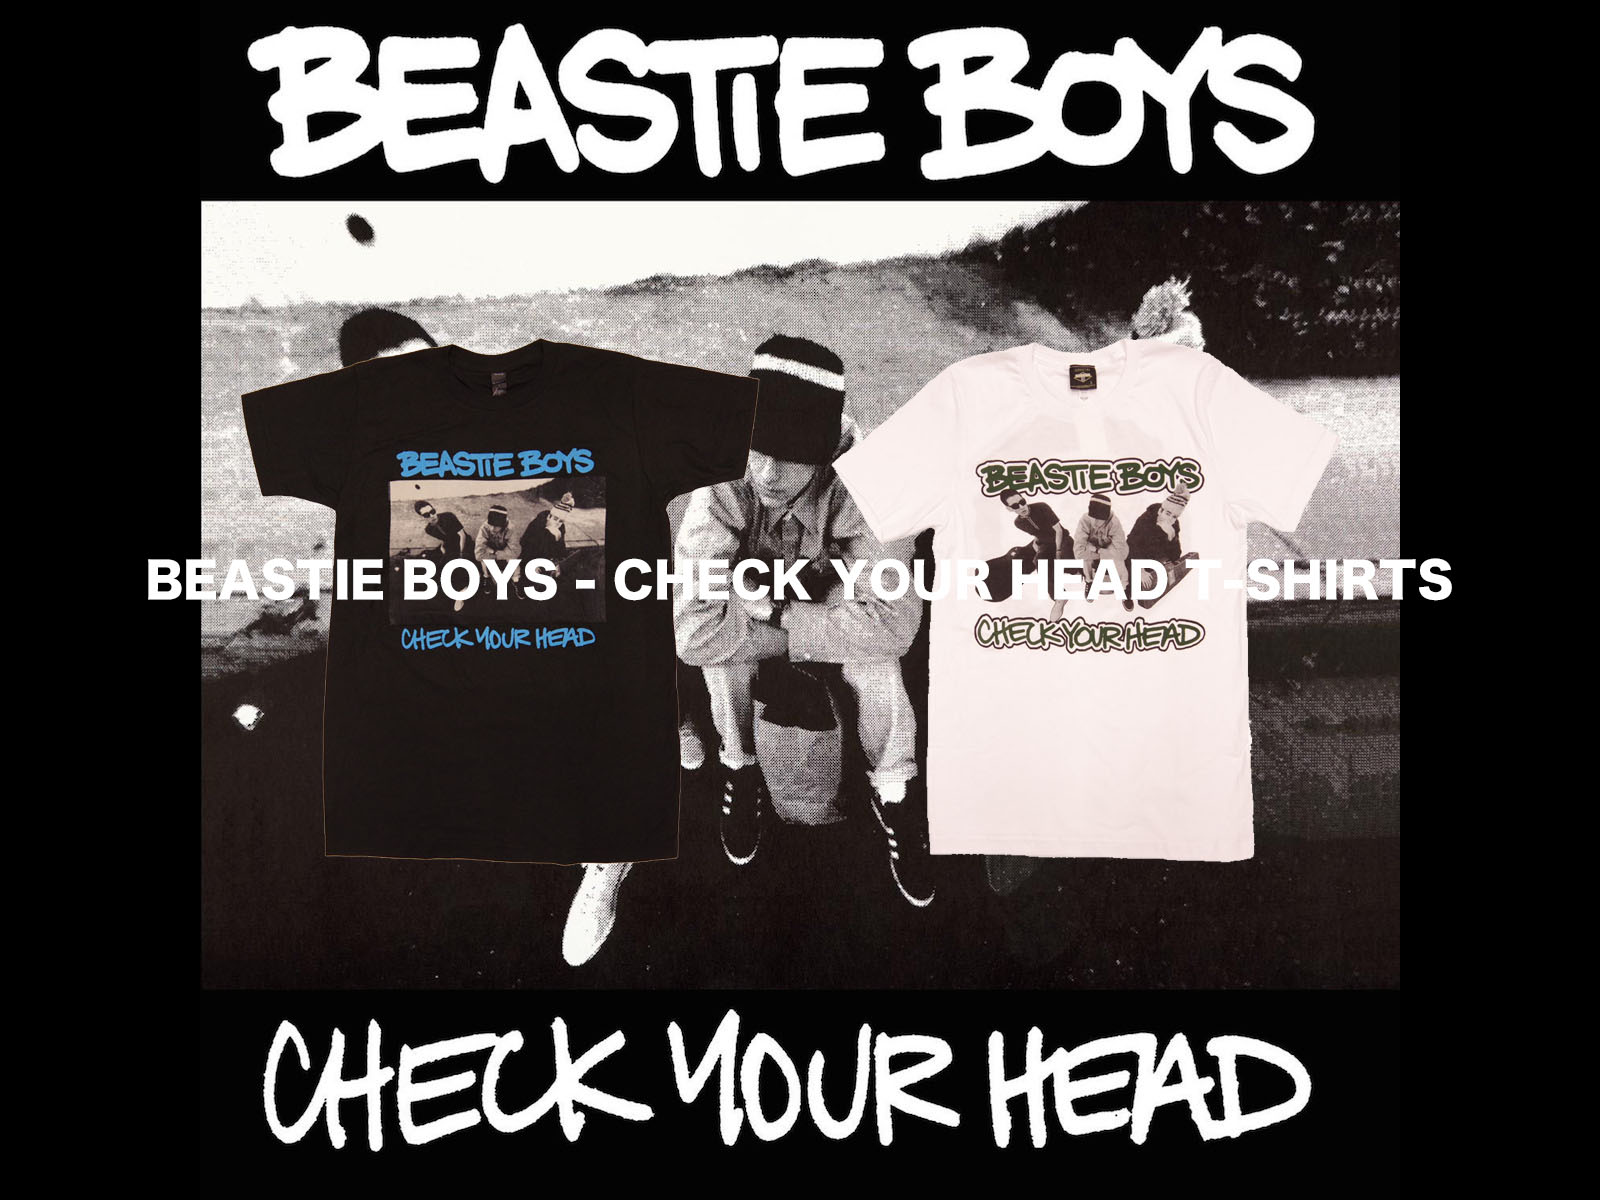 BEASTIE BOYS – CHECK YOUR HEAD T-SHIRTS